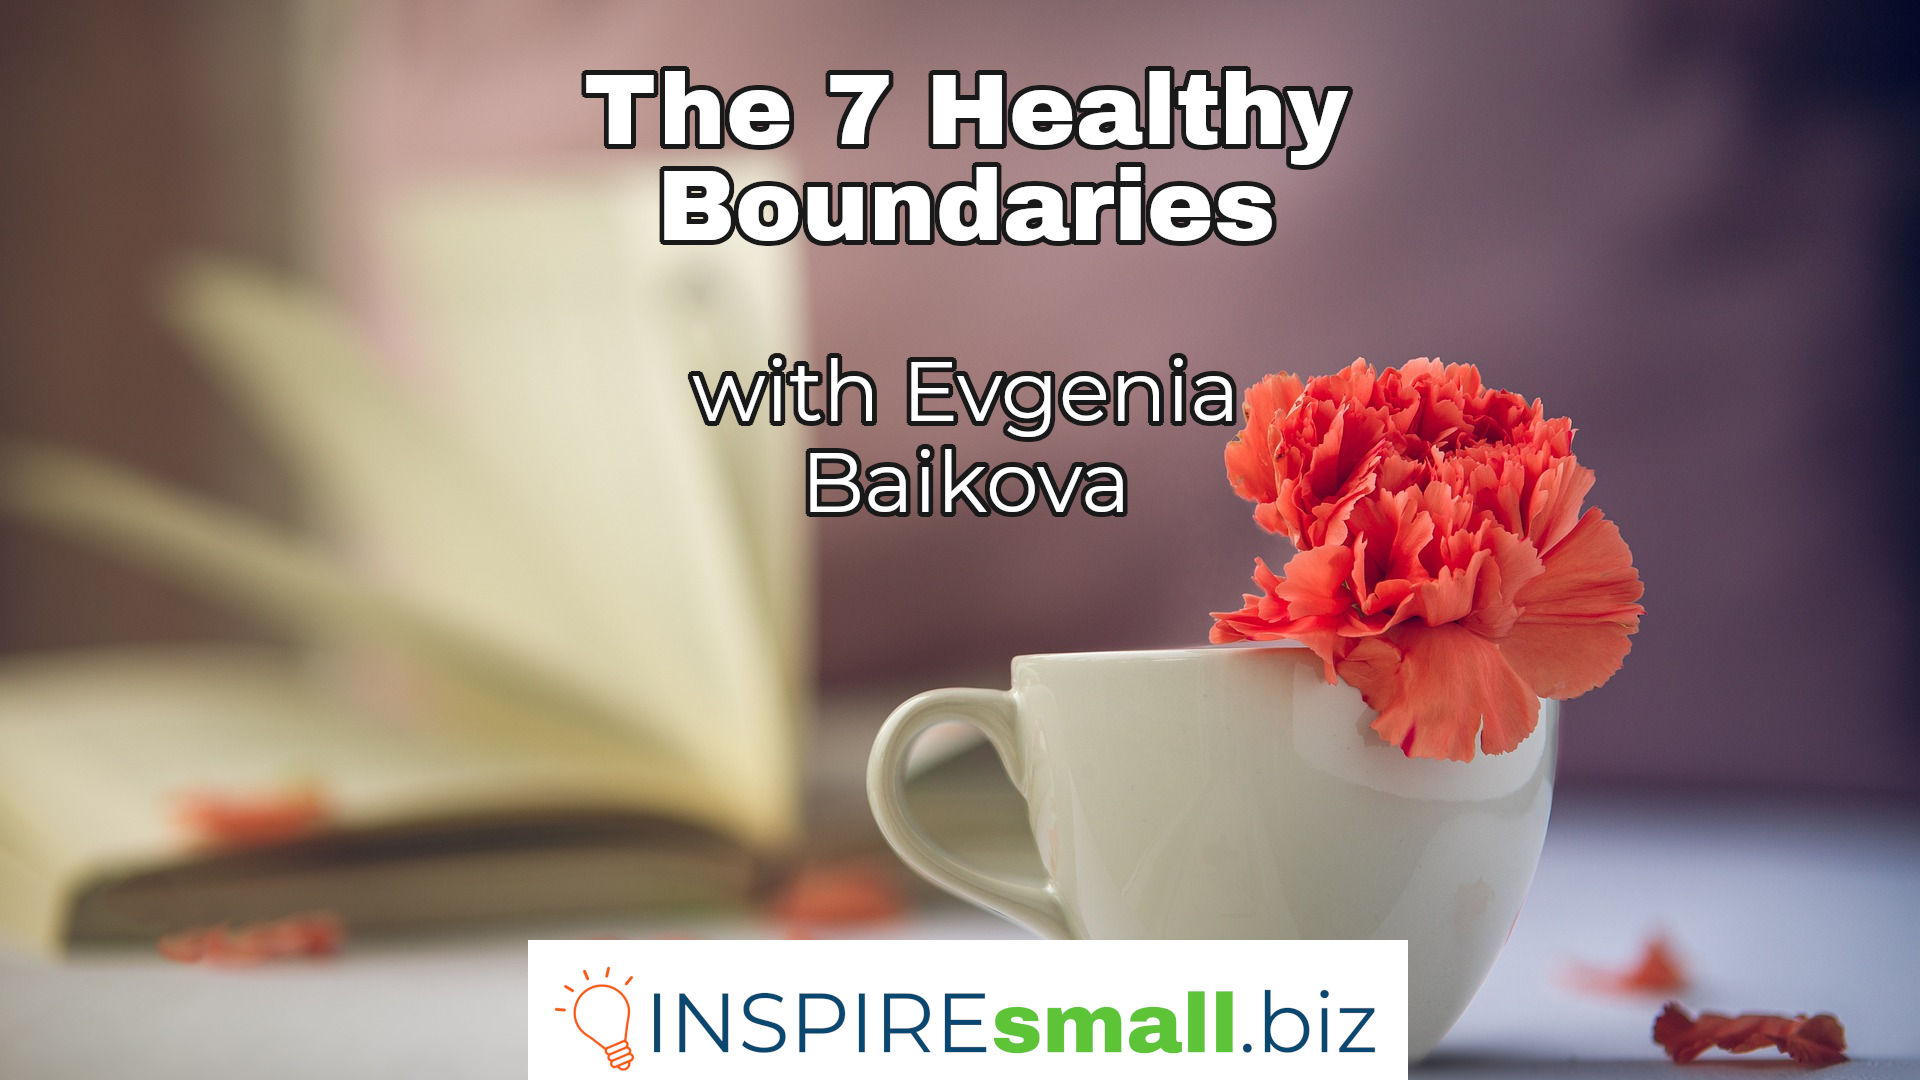 A white tea cup with a pink carnation, and an open book in the background, with the text 7 Healthy Boundaries with Evgenia Baikova, hosted by INSPIREsmall.biz